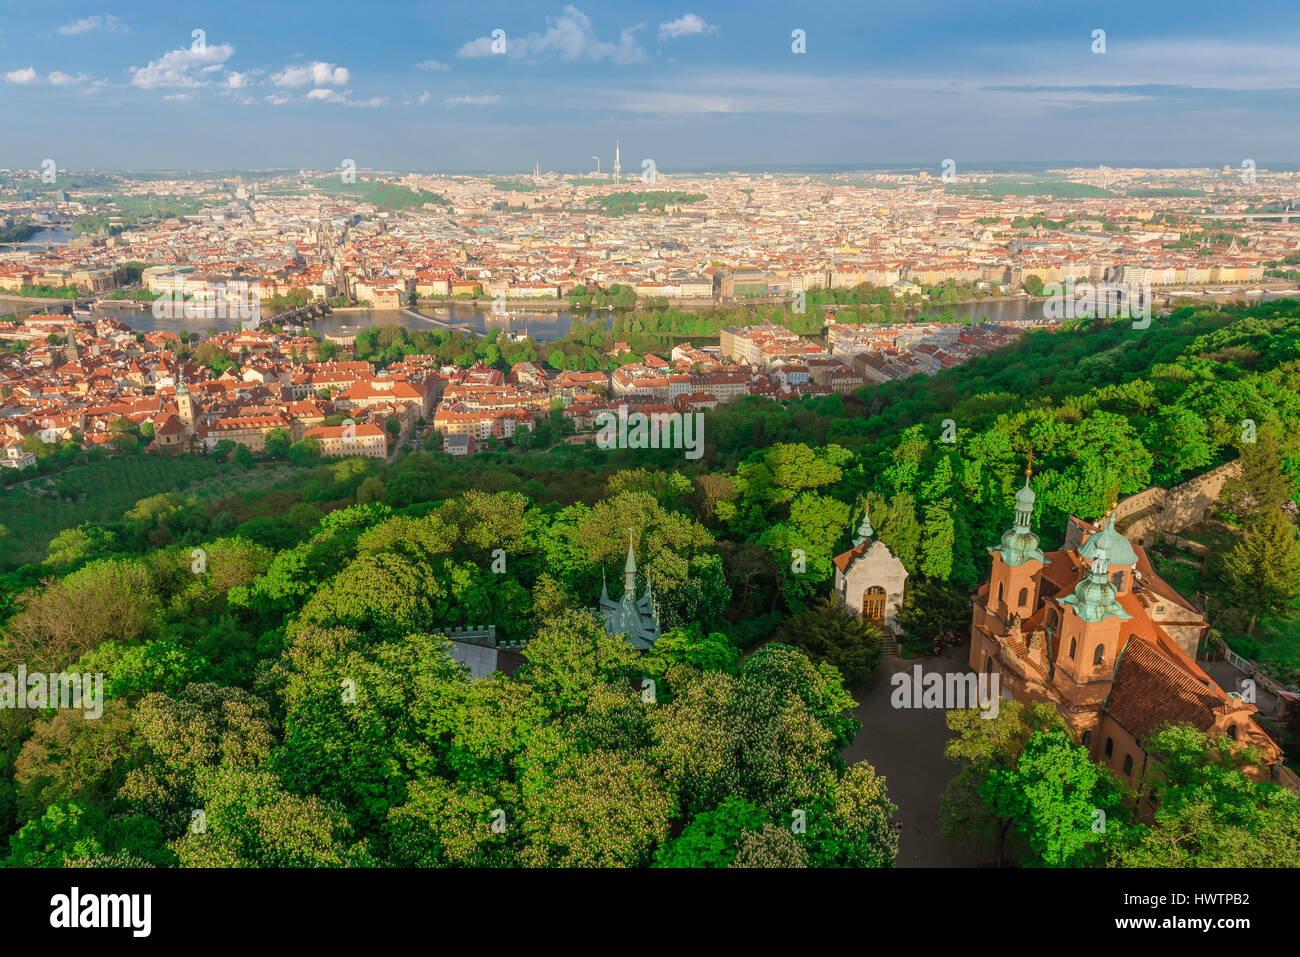 Petrin Hill Prague, aerial view of Petrin Hill park in Prague with the city's historic old towns of Mala Strana and Stare Mesto divided by the river. Stock Photo